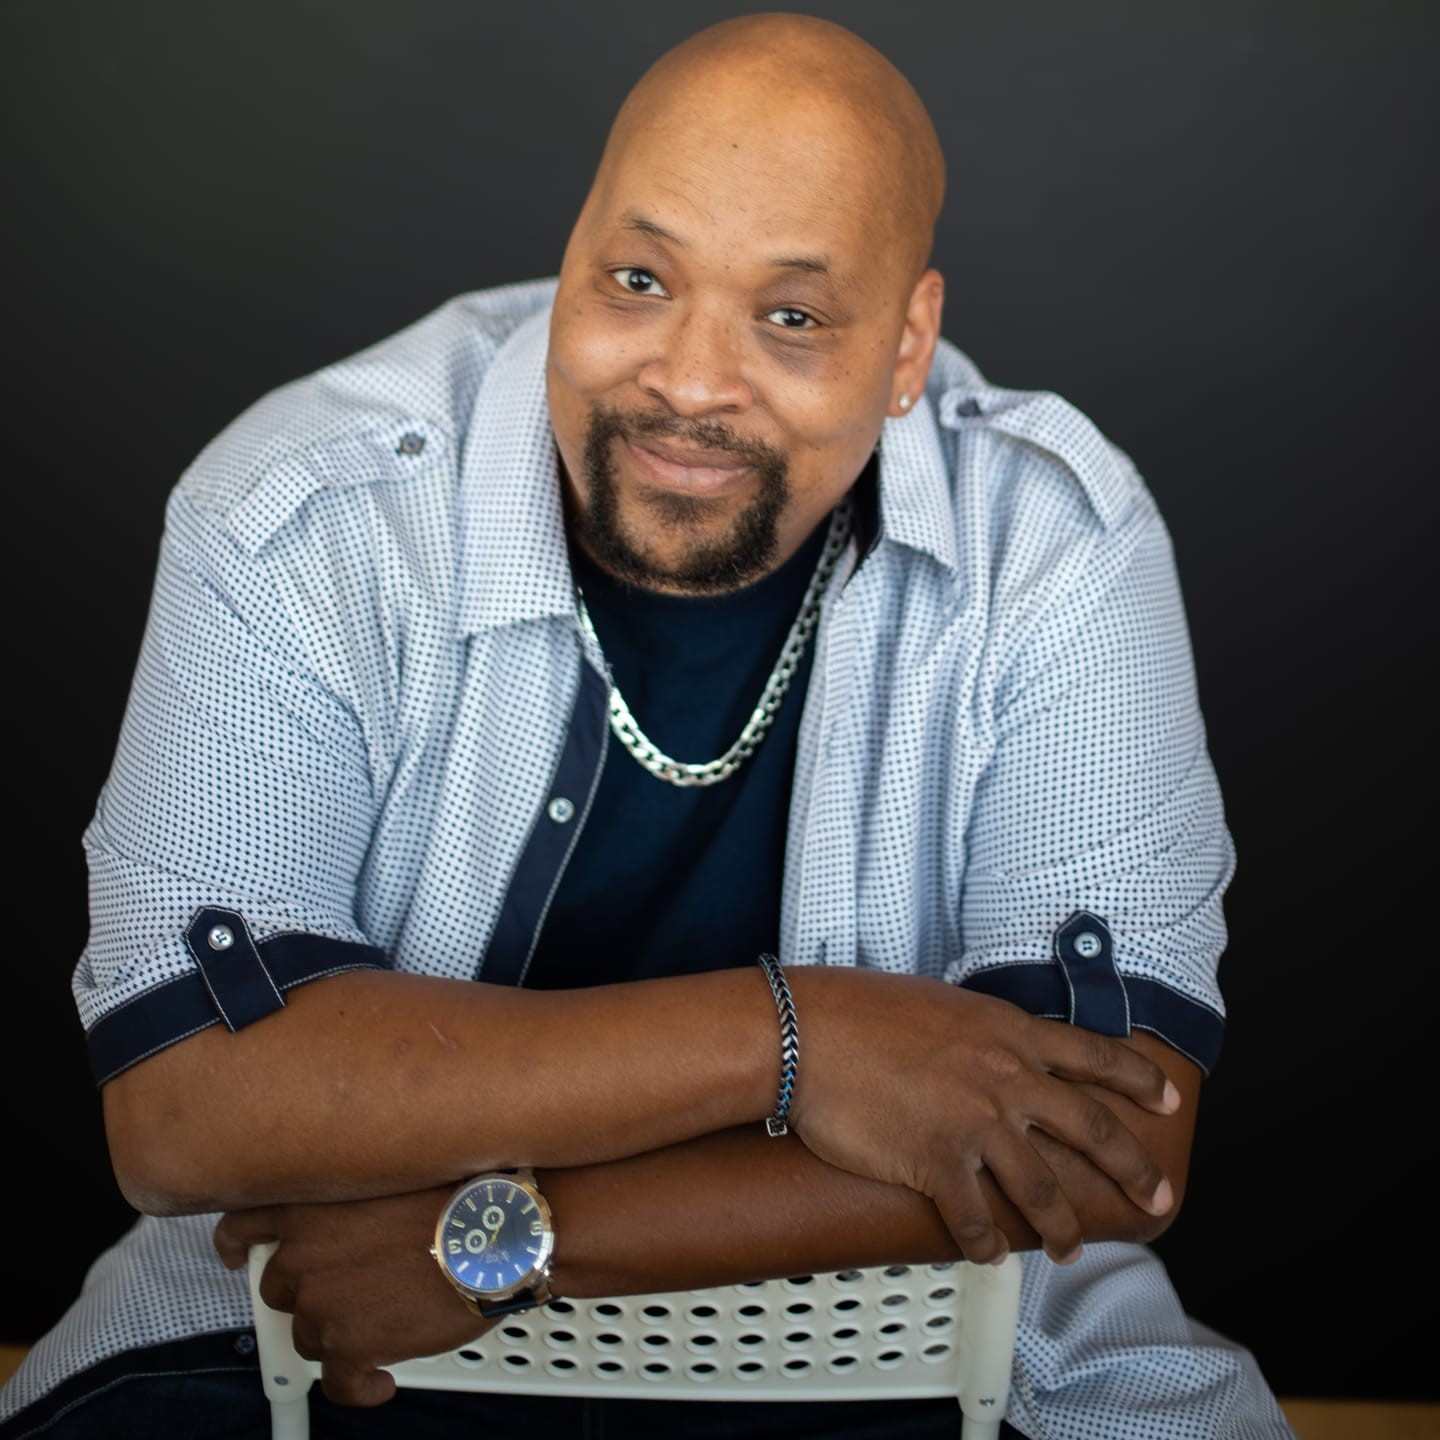 Milton Wyley - Sat. 9:30 Show Funny Stop Comedy Club on Jun 22, 21:30@Funny Stop Comedy Club - Buy tickets and Get information on Funny Stop funnystop.online